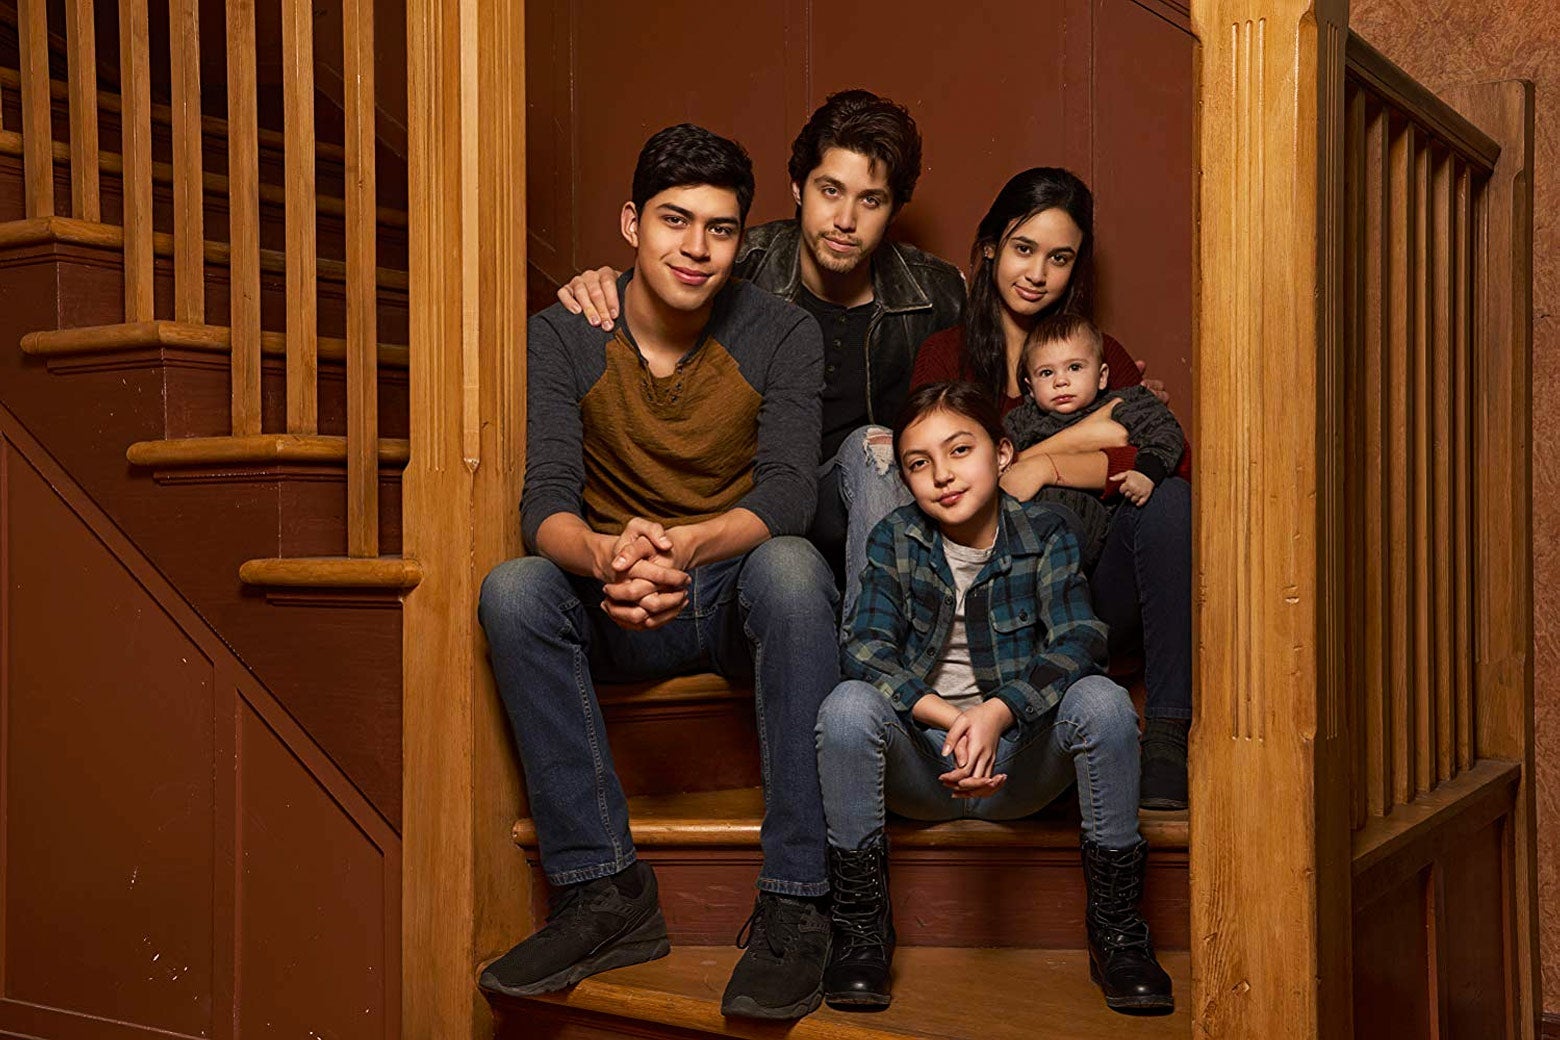 The Acosta siblings sit on the stairs together.